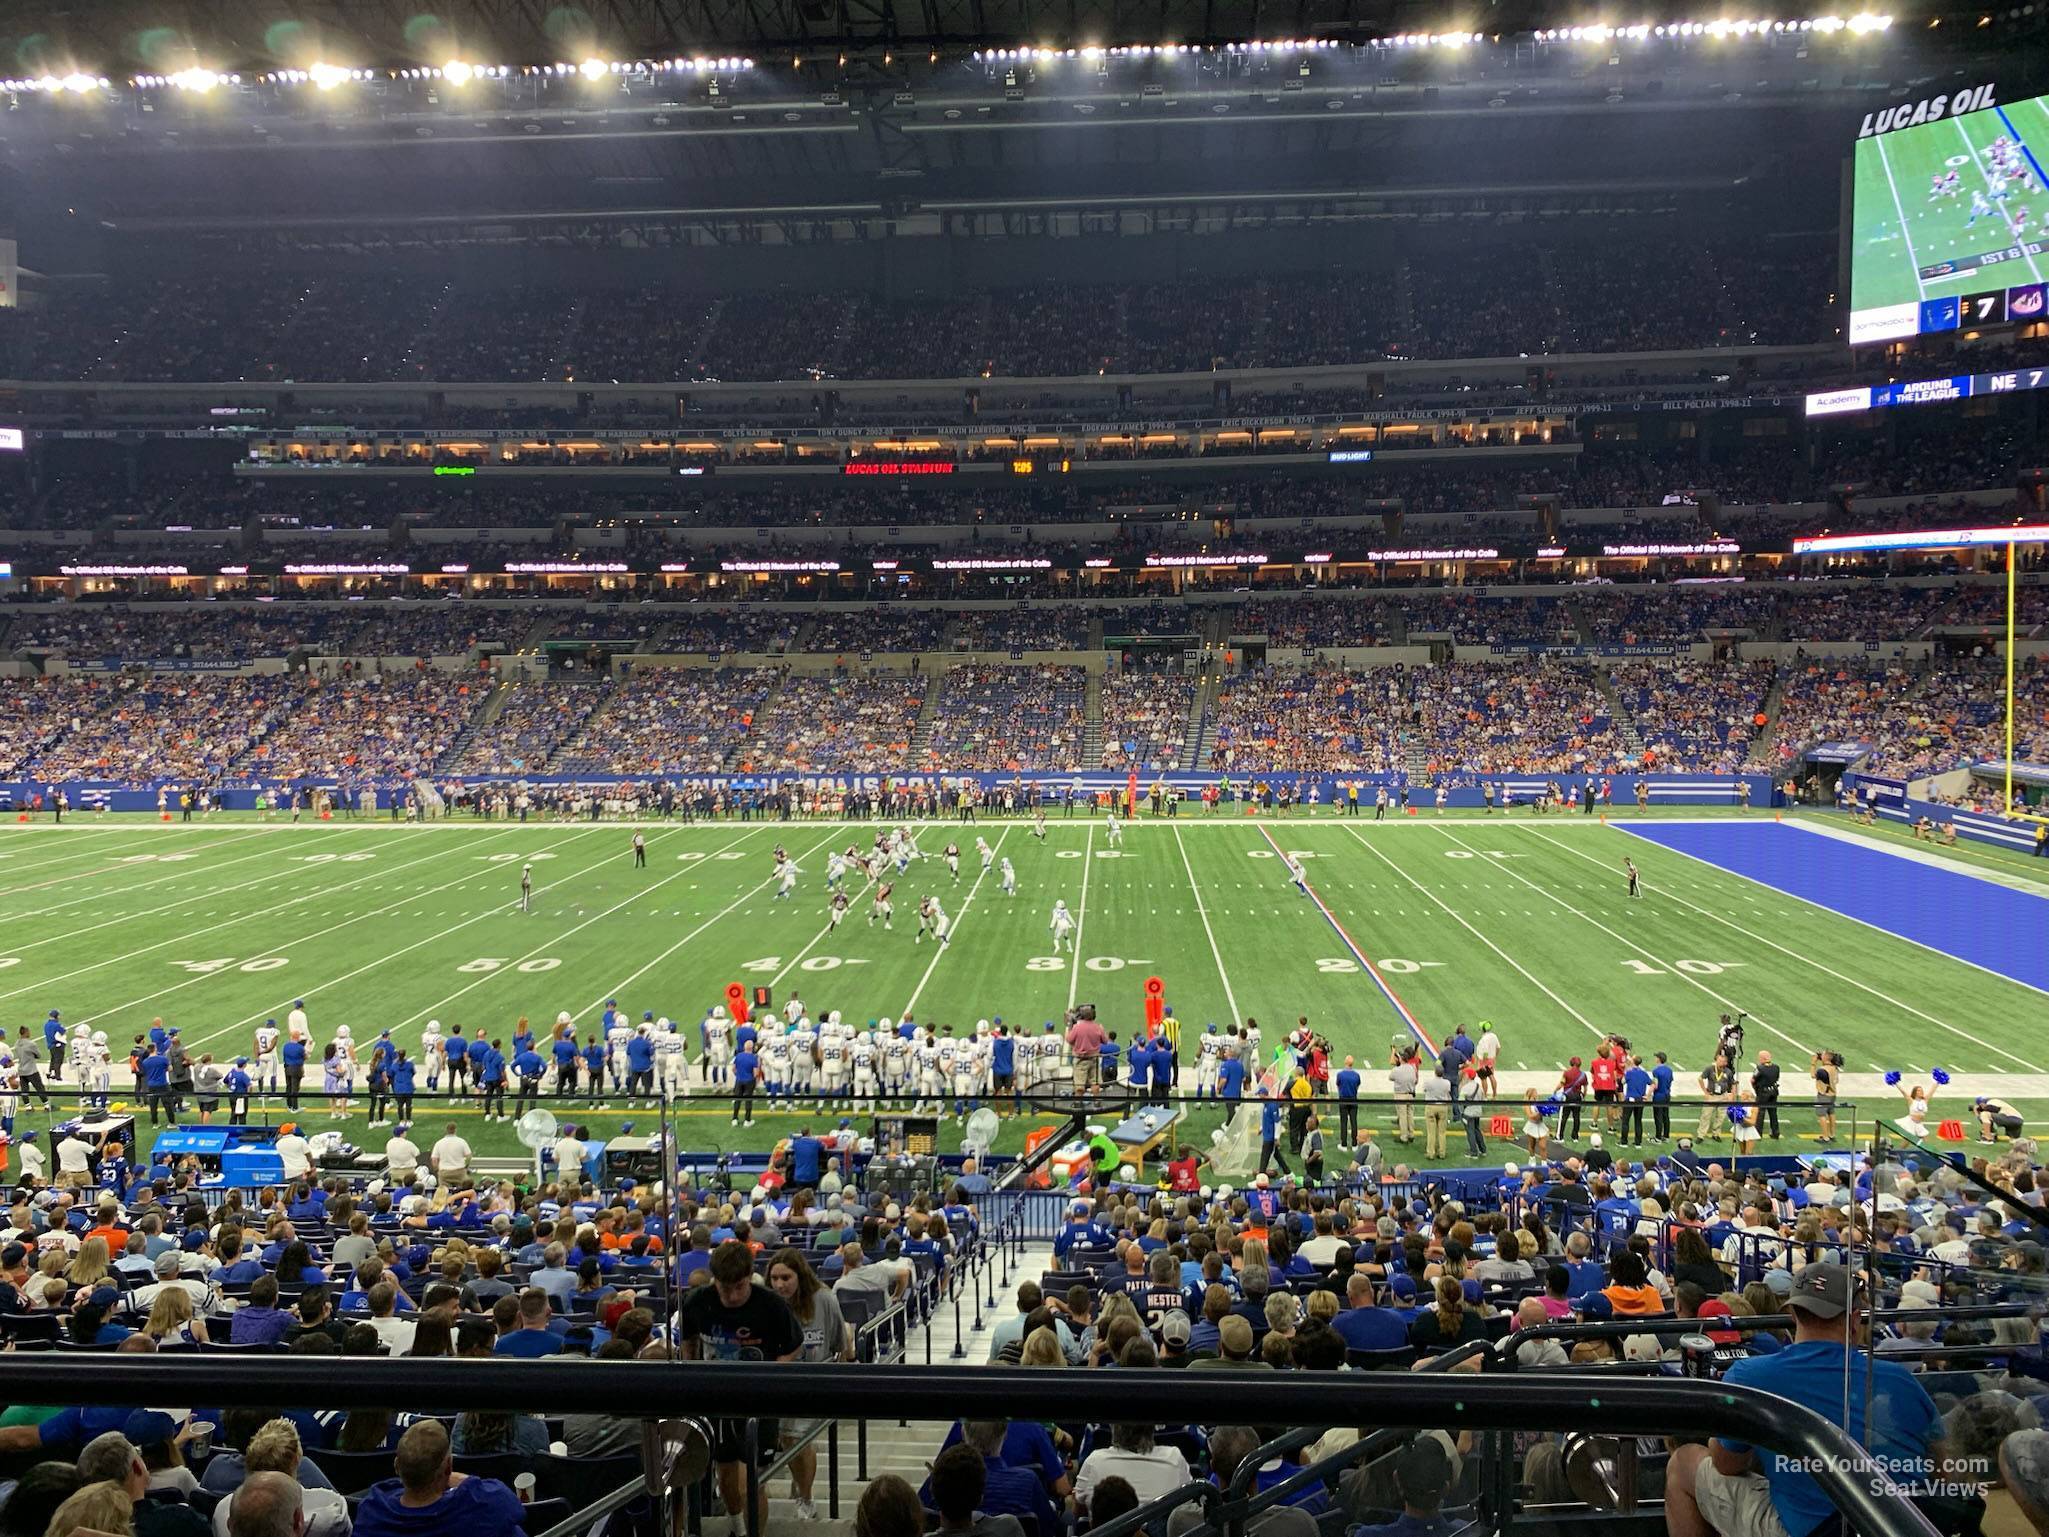 section 239, row 1 seat view  for football - lucas oil stadium